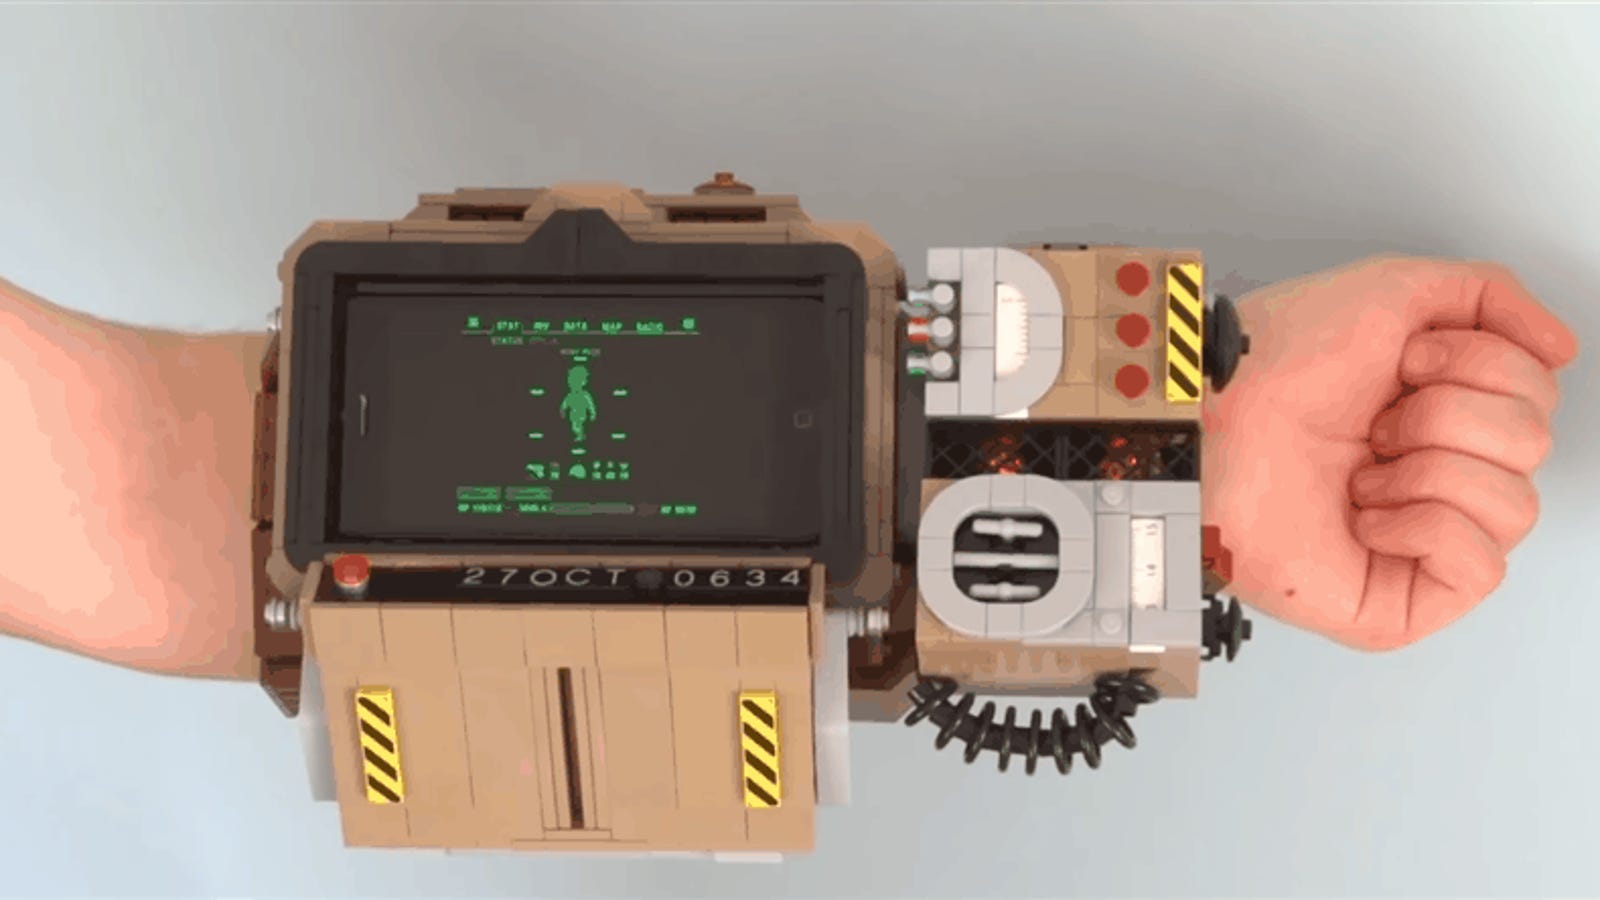 Image result for LEGO version of Fallout 76's Pip-Boy 2000 MK VI